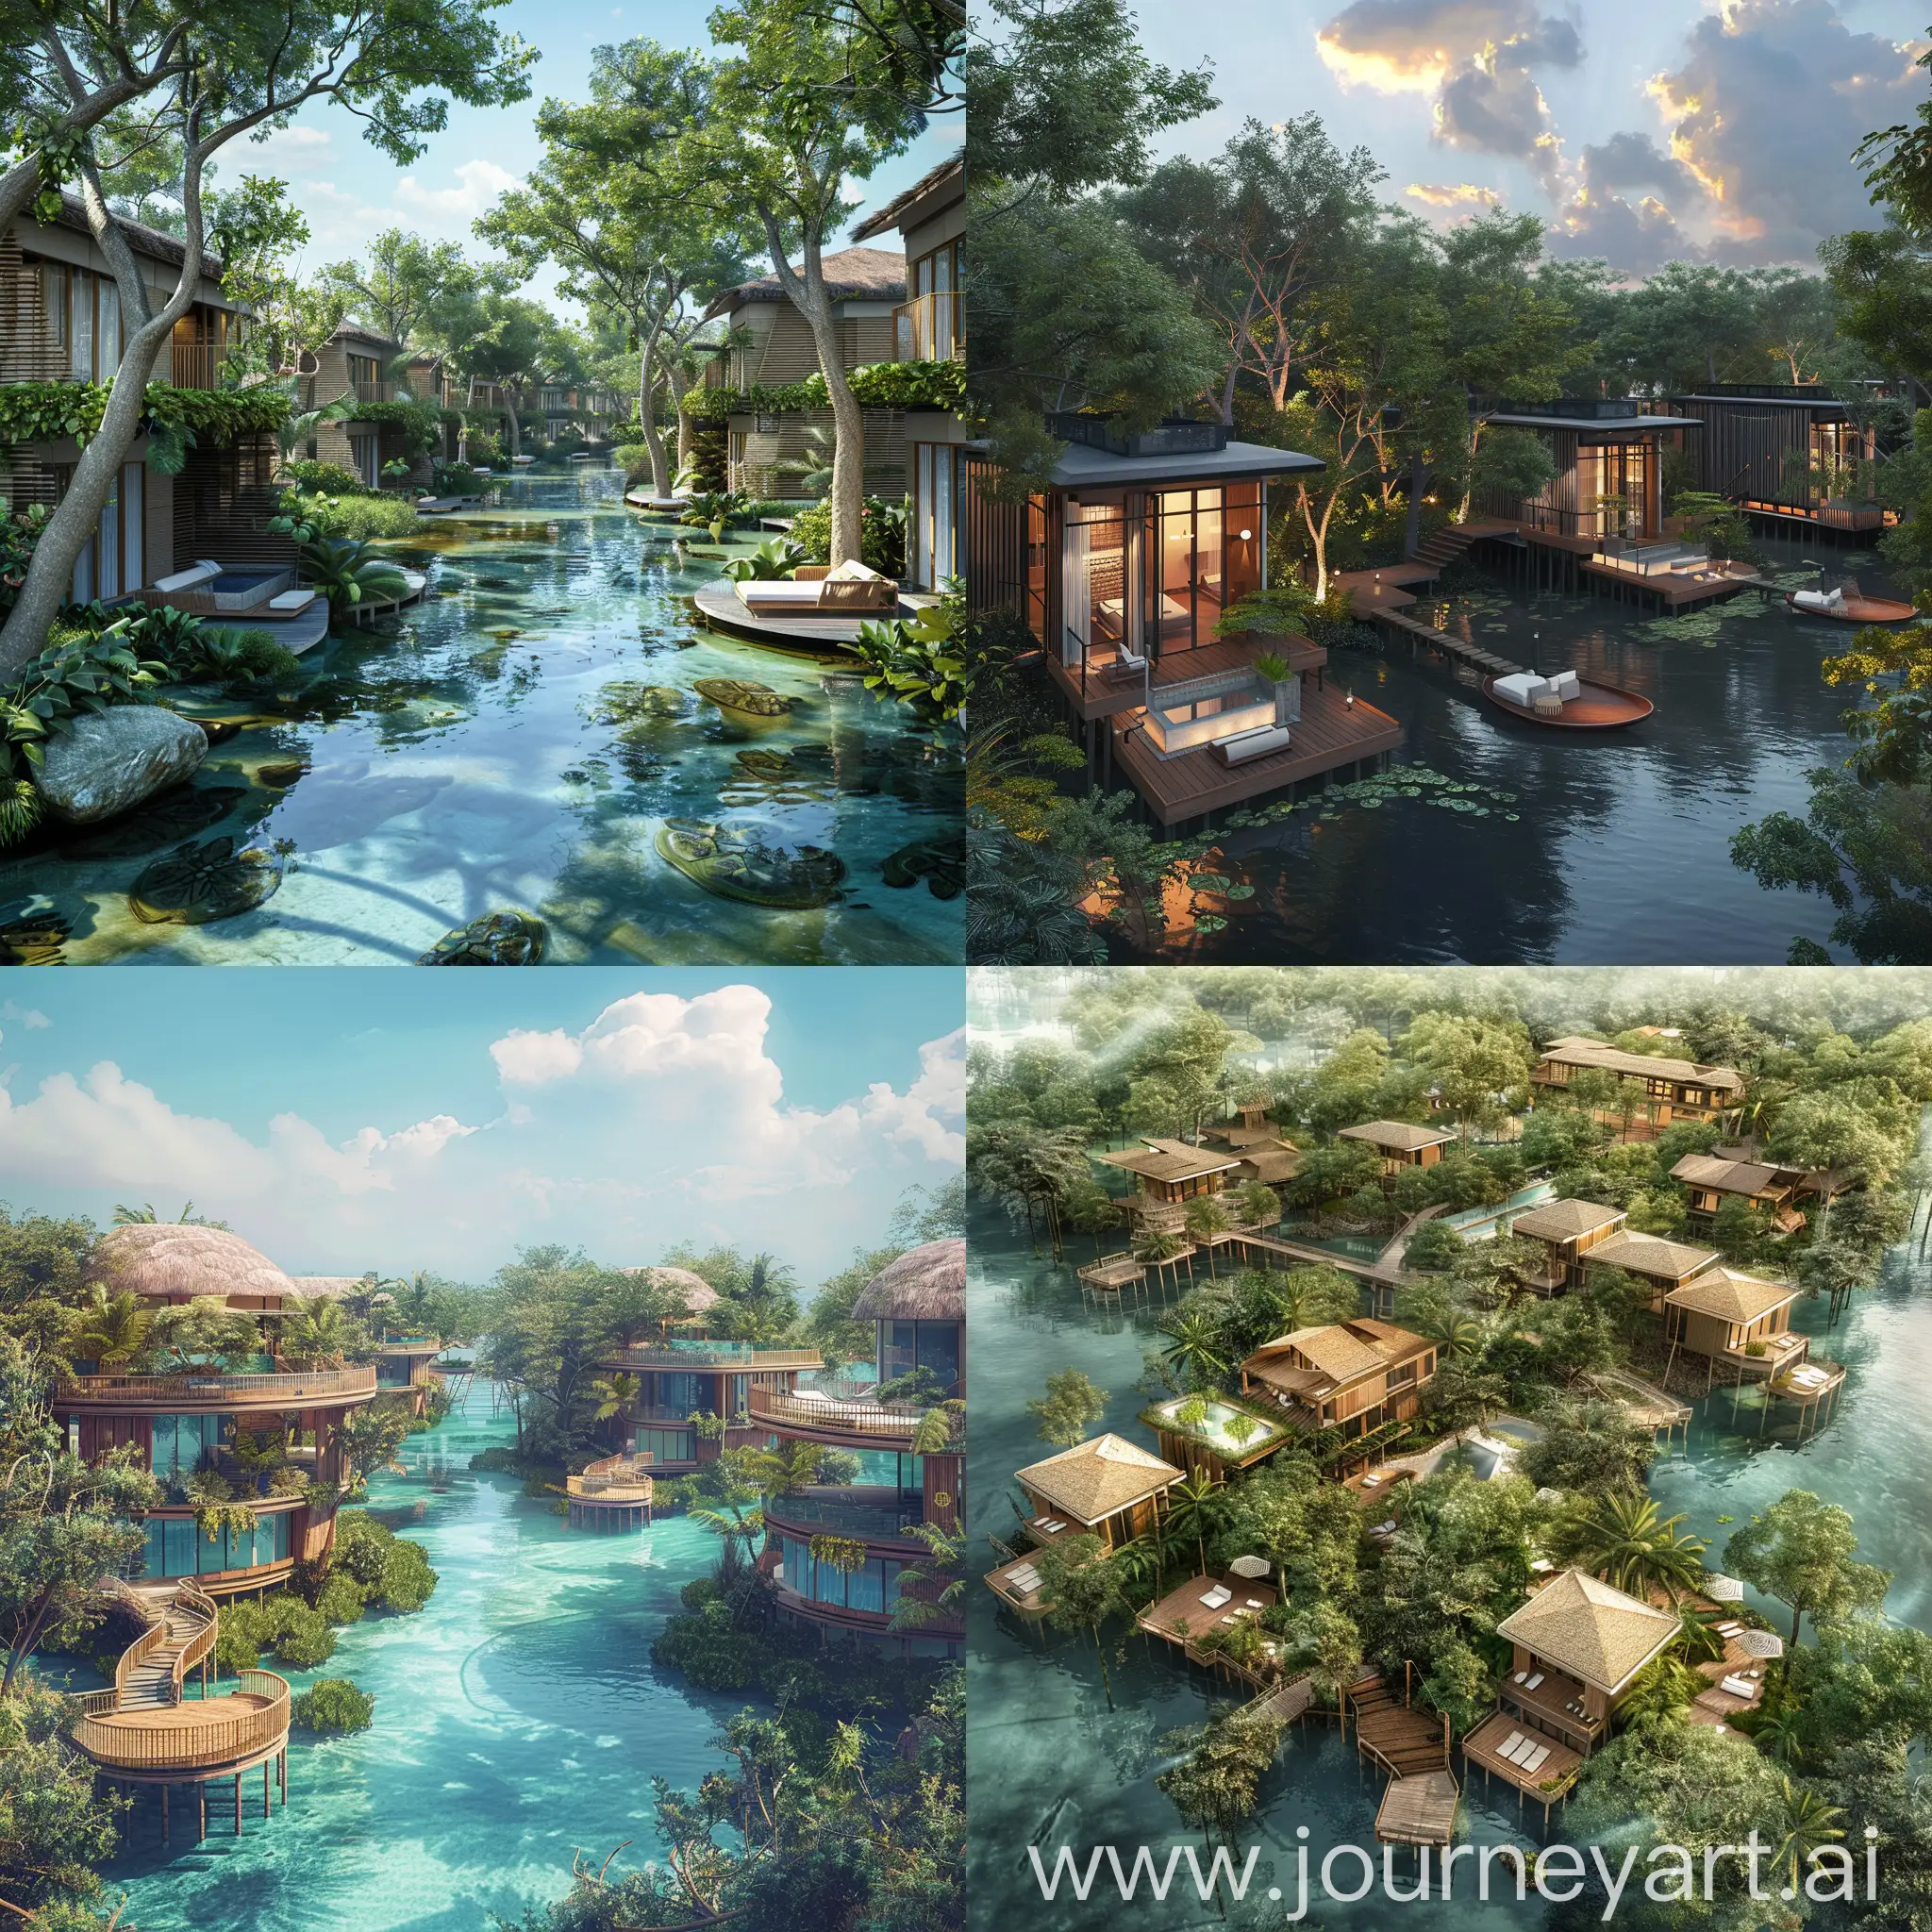 I've created an image of a resort layout that captures the essence of luxury and sustainability, harmoniously integrated with the serene beauty of mangroves. I hope it inspires you and meets your vision! 🌿✨